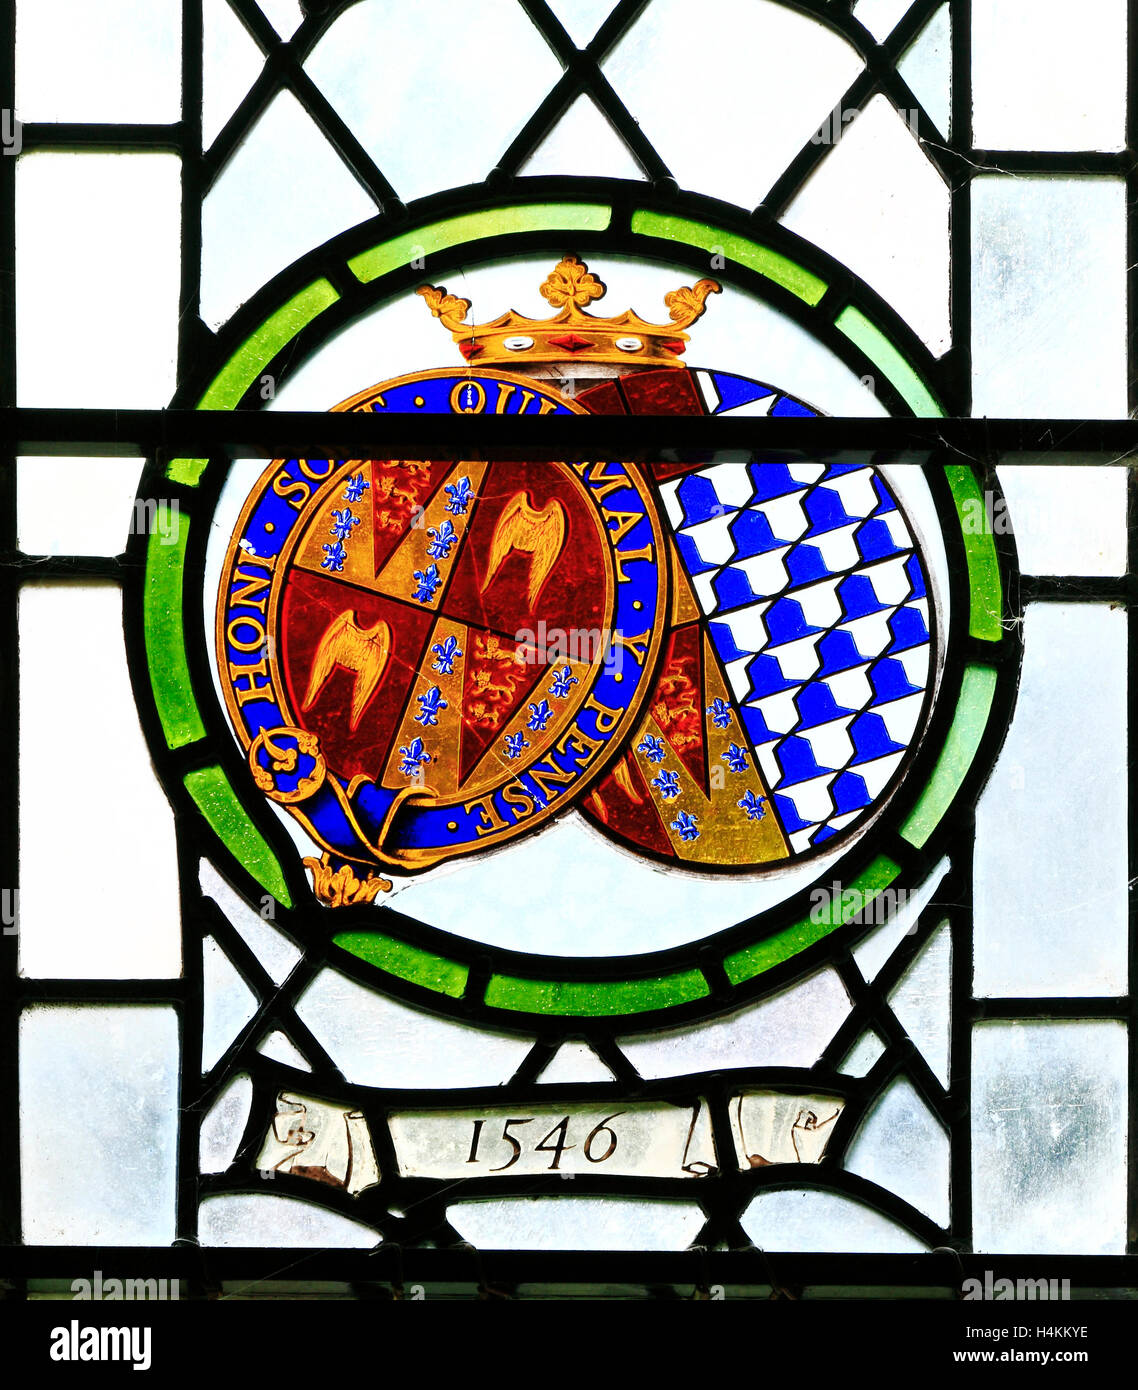 Stanhoe, Norfolk, Arms of Edward Seymour, Duke of Somerset, Earl of Hertford, Lord Protector in reign of his nephew King Edward Stock Photo